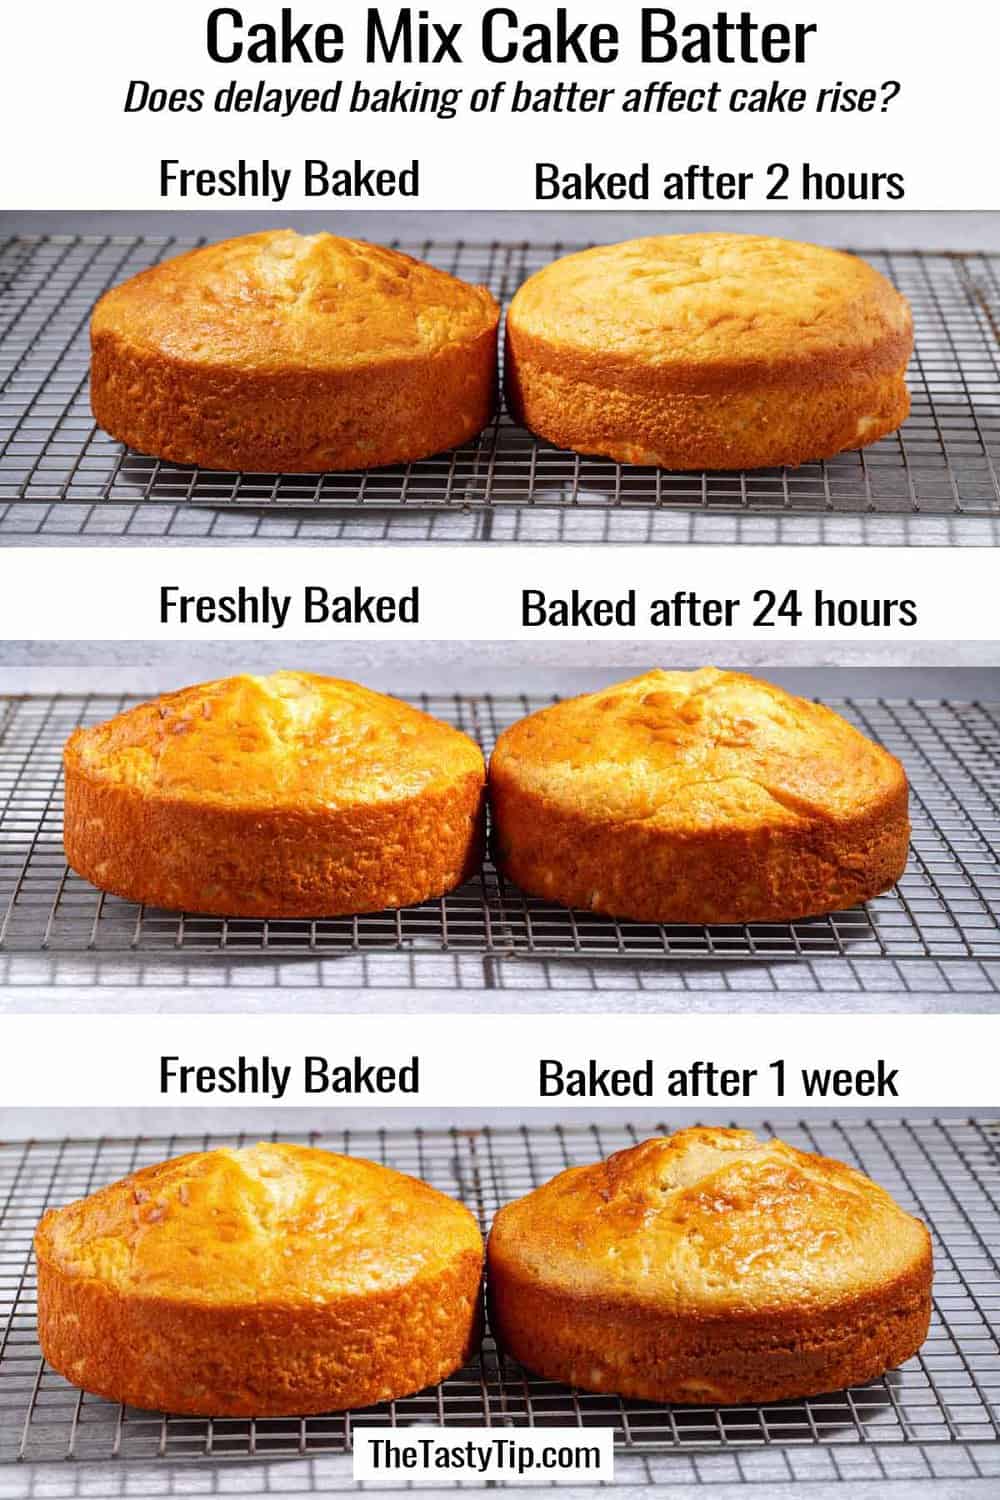 comparisons of fresh cake mix batter baked right away or delayed